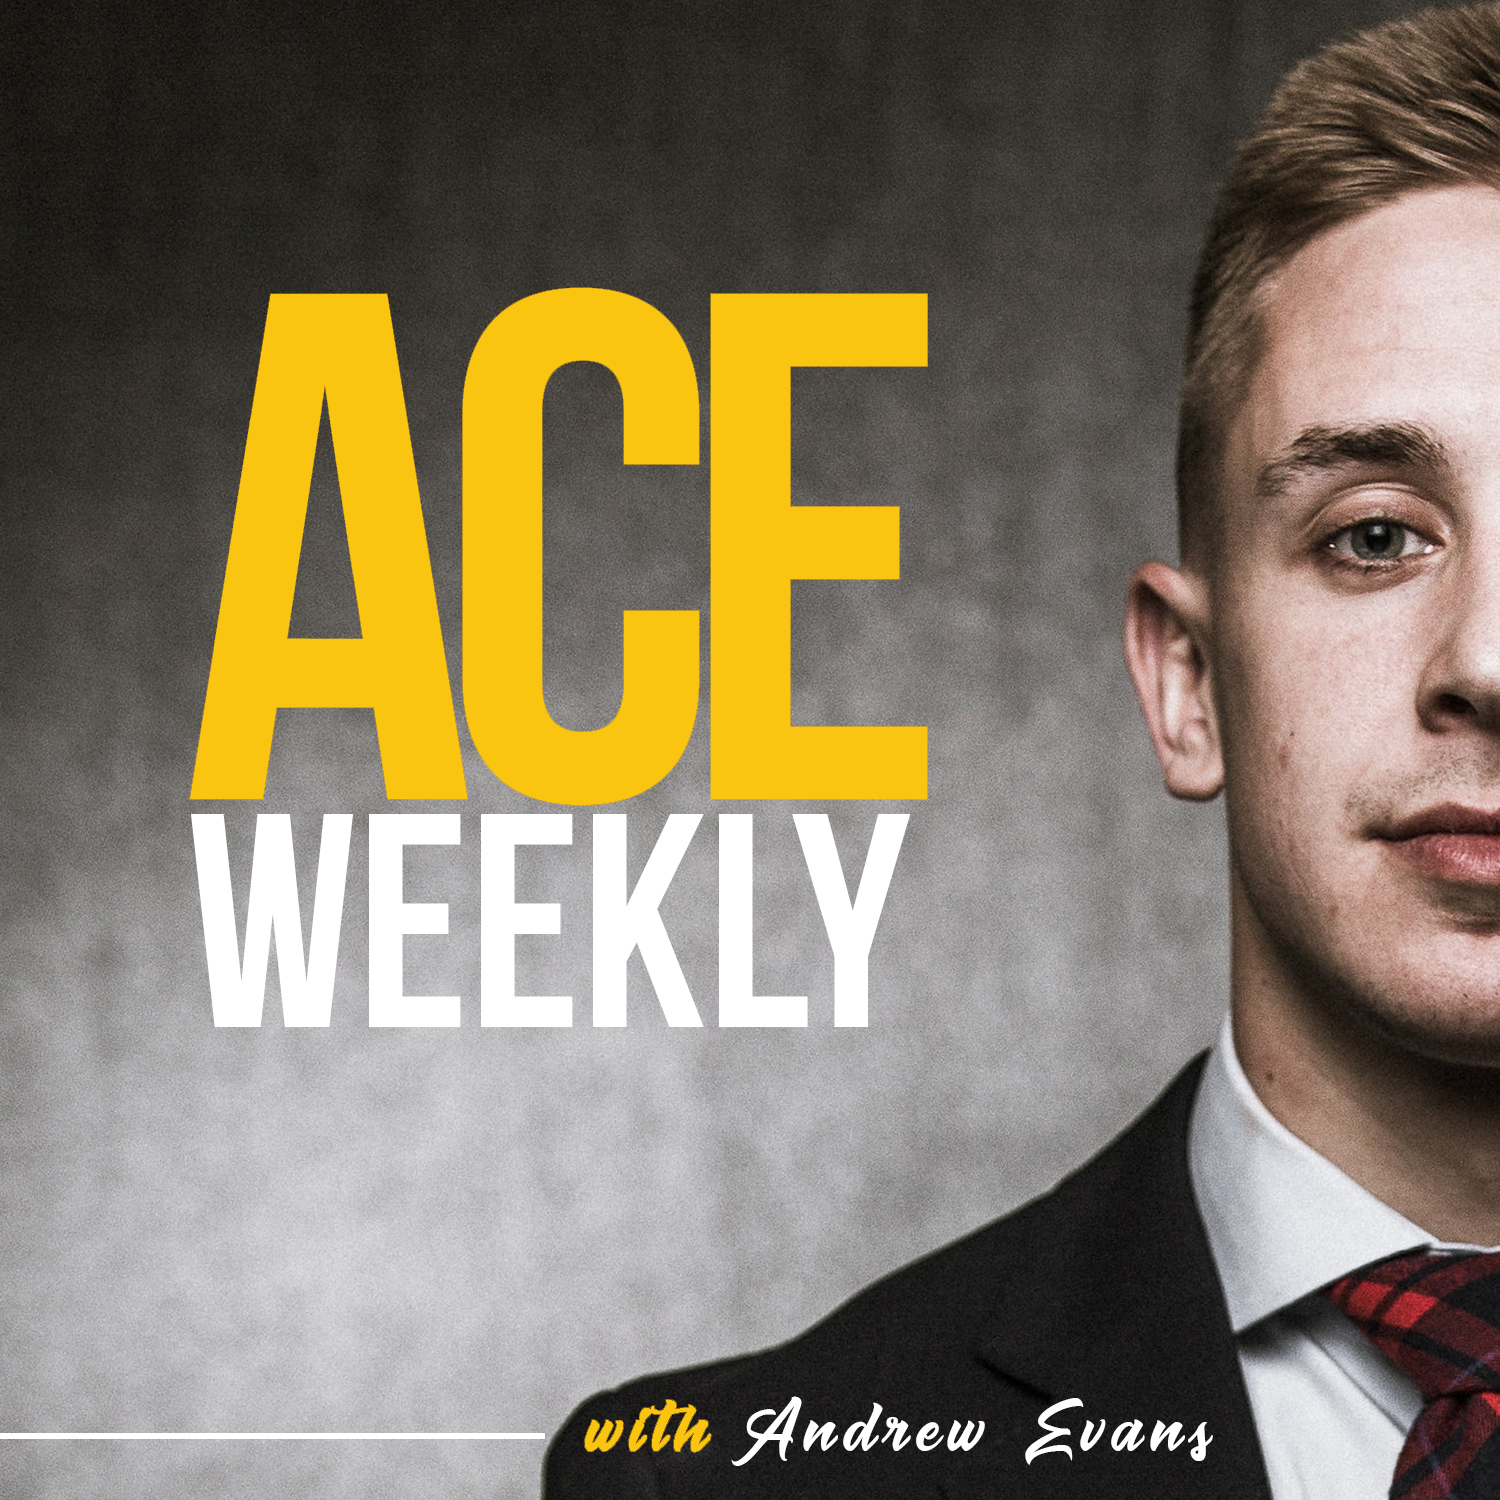 Ace_Weekly_Cover_Art.png